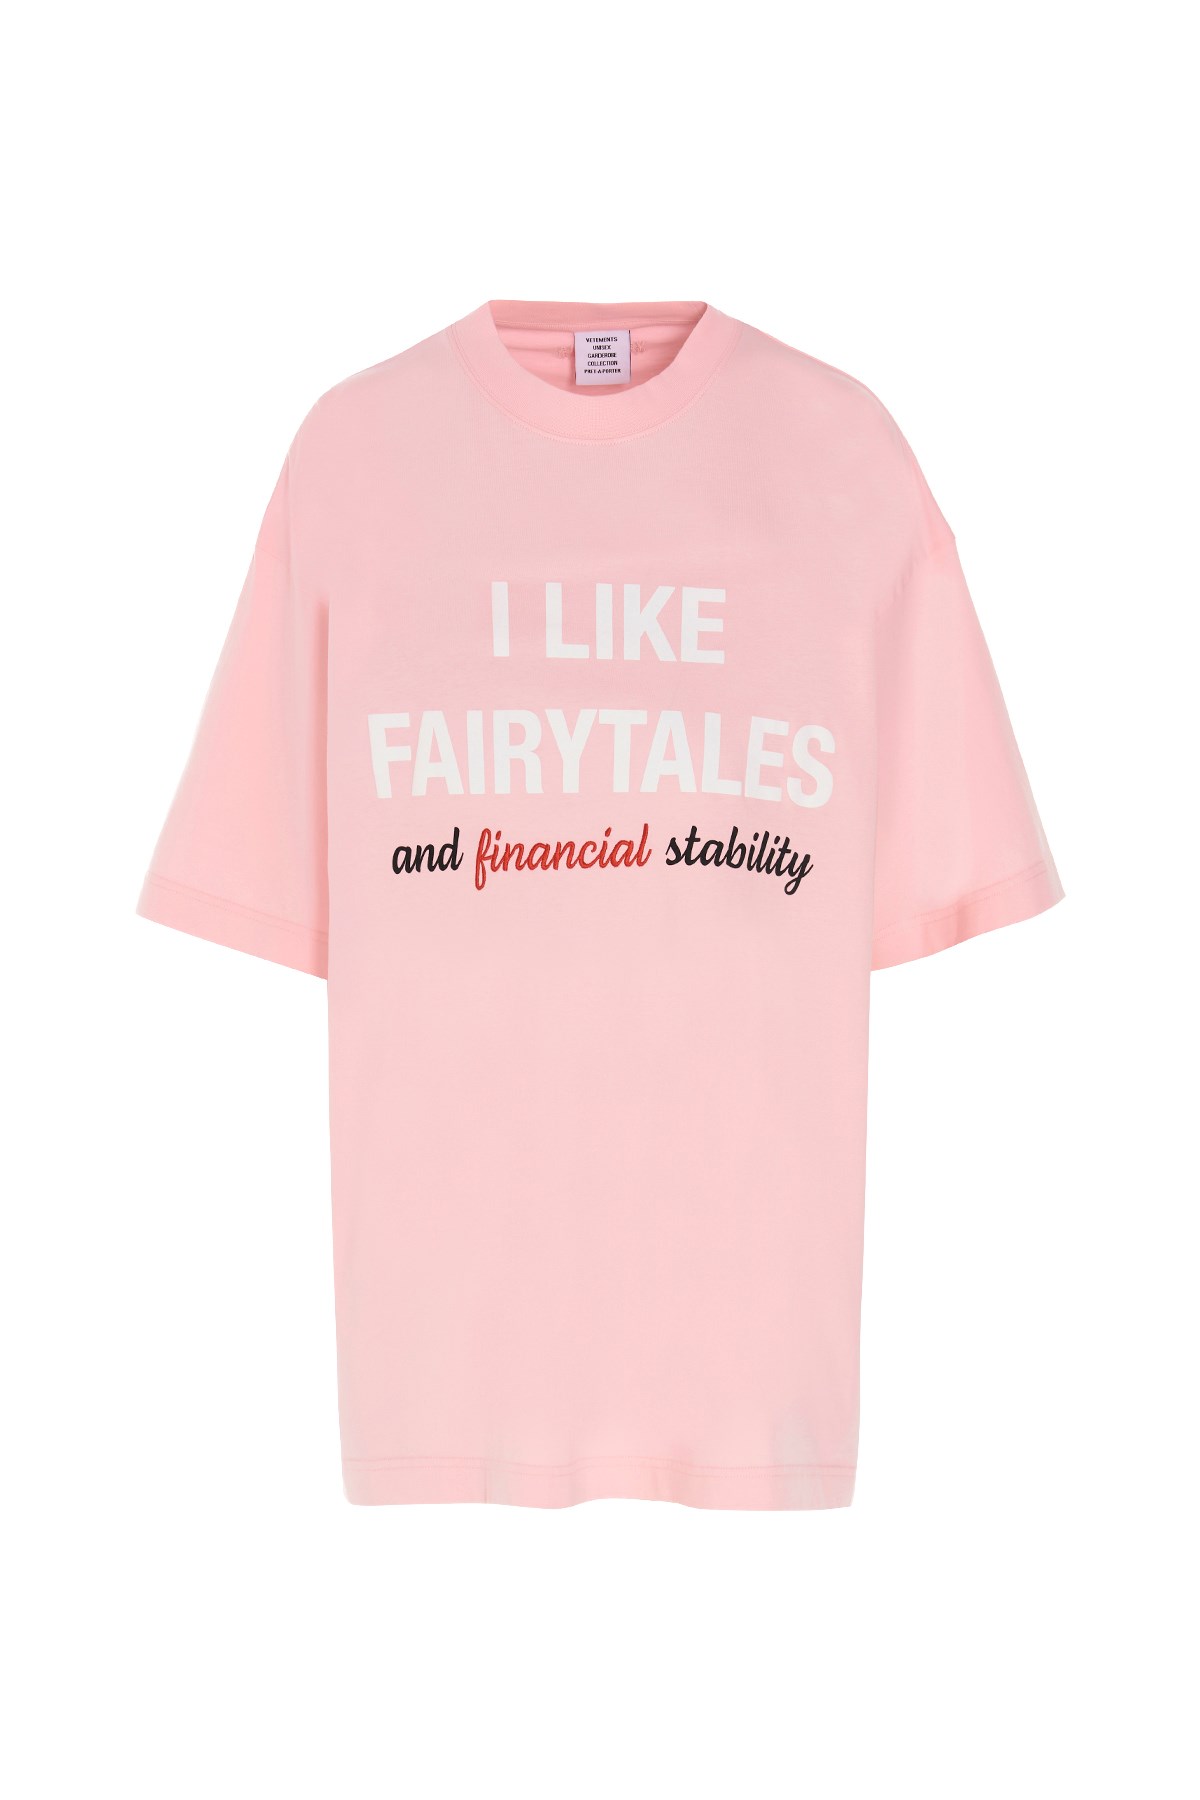 VETEMENTS 'I Like Fairytales And Financial Stability' T-Shirt